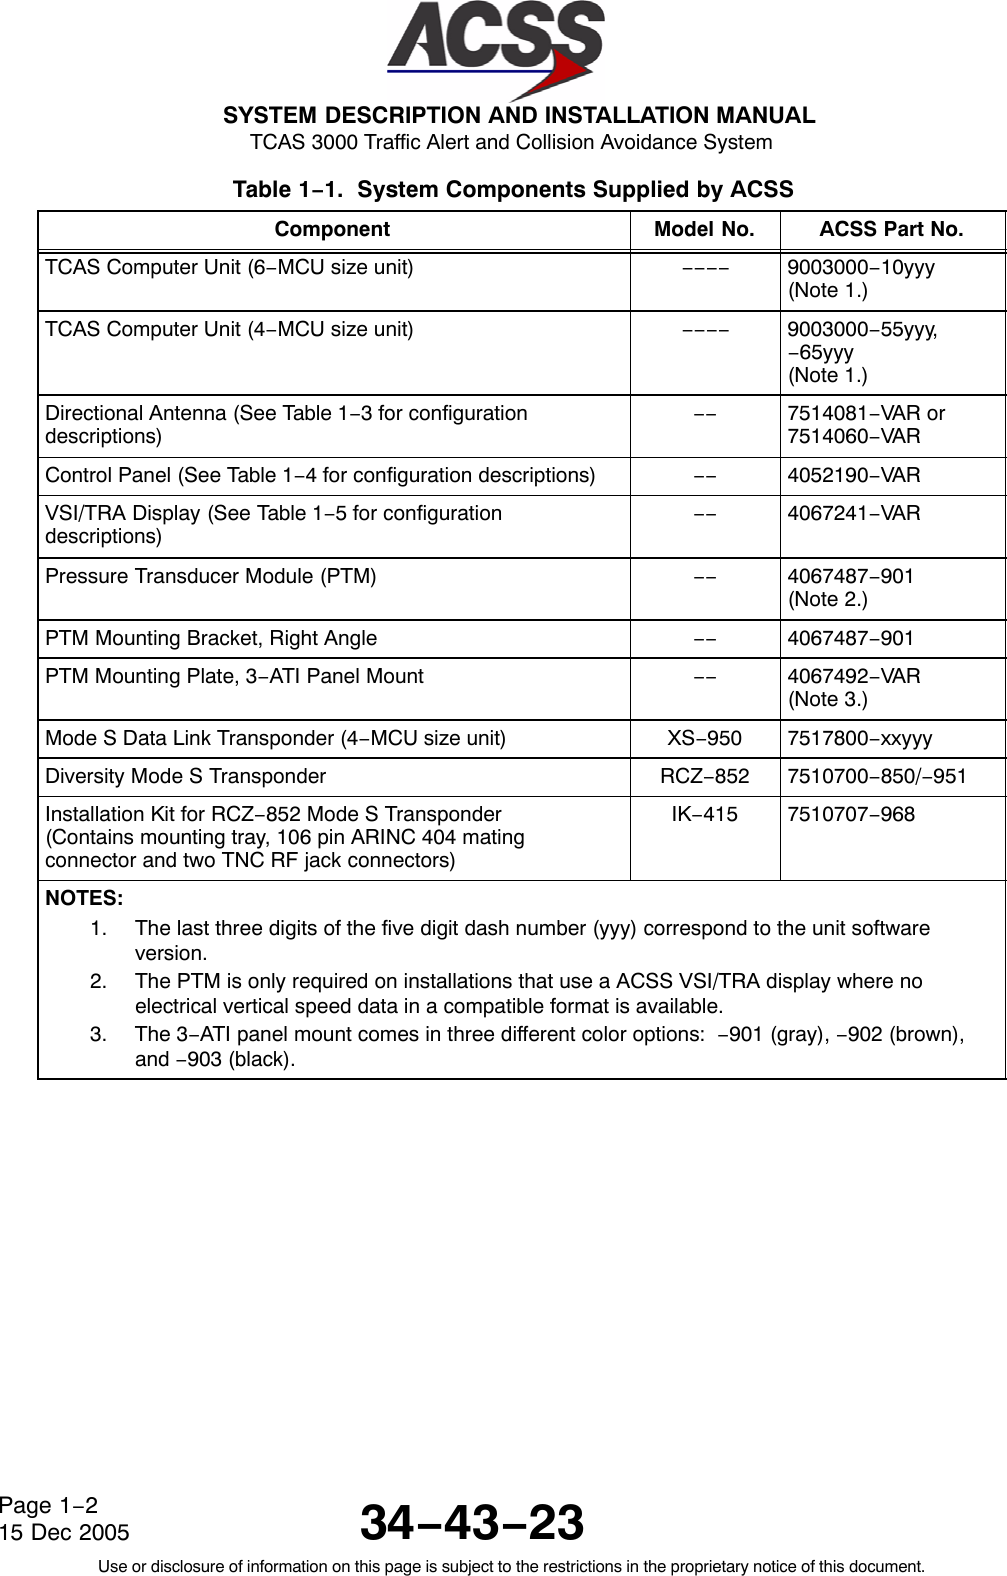  SYSTEM DESCRIPTION AND INSTALLATION MANUAL TCAS 3000 Traffic Alert and Collision Avoidance System34−43−23Use or disclosure of information on this page is subject to the restrictions in the proprietary notice of this document.Page 1−215 Dec 2005Table 1−1.  System Components Supplied by ACSS  Component Model No. ACSS Part No.TCAS Computer Unit (6−MCU size unit) −−−− 9003000−10yyy(Note 1.)TCAS Computer Unit (4−MCU size unit) −−−− 9003000−55yyy,−65yyy(Note 1.)Directional Antenna (See Table 1−3 for configurationdescriptions)−− 7514081−VAR or7514060−VA RControl Panel (See Table 1−4 for configuration descriptions) −− 4052190−VA RVSI/TRA Display (See Table 1−5 for configurationdescriptions)−− 4067241−VA RPressure Transducer Module (PTM) −− 4067487−901(Note 2.)PTM Mounting Bracket, Right Angle −− 4067487−901PTM Mounting Plate, 3−ATI Panel Mount −− 4067492−VA R(Note 3.)Mode S Data Link Transponder (4−MCU size unit) XS−950 7517800−xxyyyDiversity Mode S Transponder RCZ−852 7510700−850/−951Installation Kit for RCZ−852 Mode S Transponder(Contains mounting tray, 106 pin ARINC 404 matingconnector and two TNC RF jack connectors)IK−415 7510707−968NOTES:1. The last three digits of the five digit dash number (yyy) correspond to the unit softwareversion.2. The PTM is only required on installations that use a ACSS VSI/TRA display where noelectrical vertical speed data in a compatible format is available.3. The 3−ATI panel mount comes in three different color options:  −901 (gray), −902 (brown),and −903 (black).